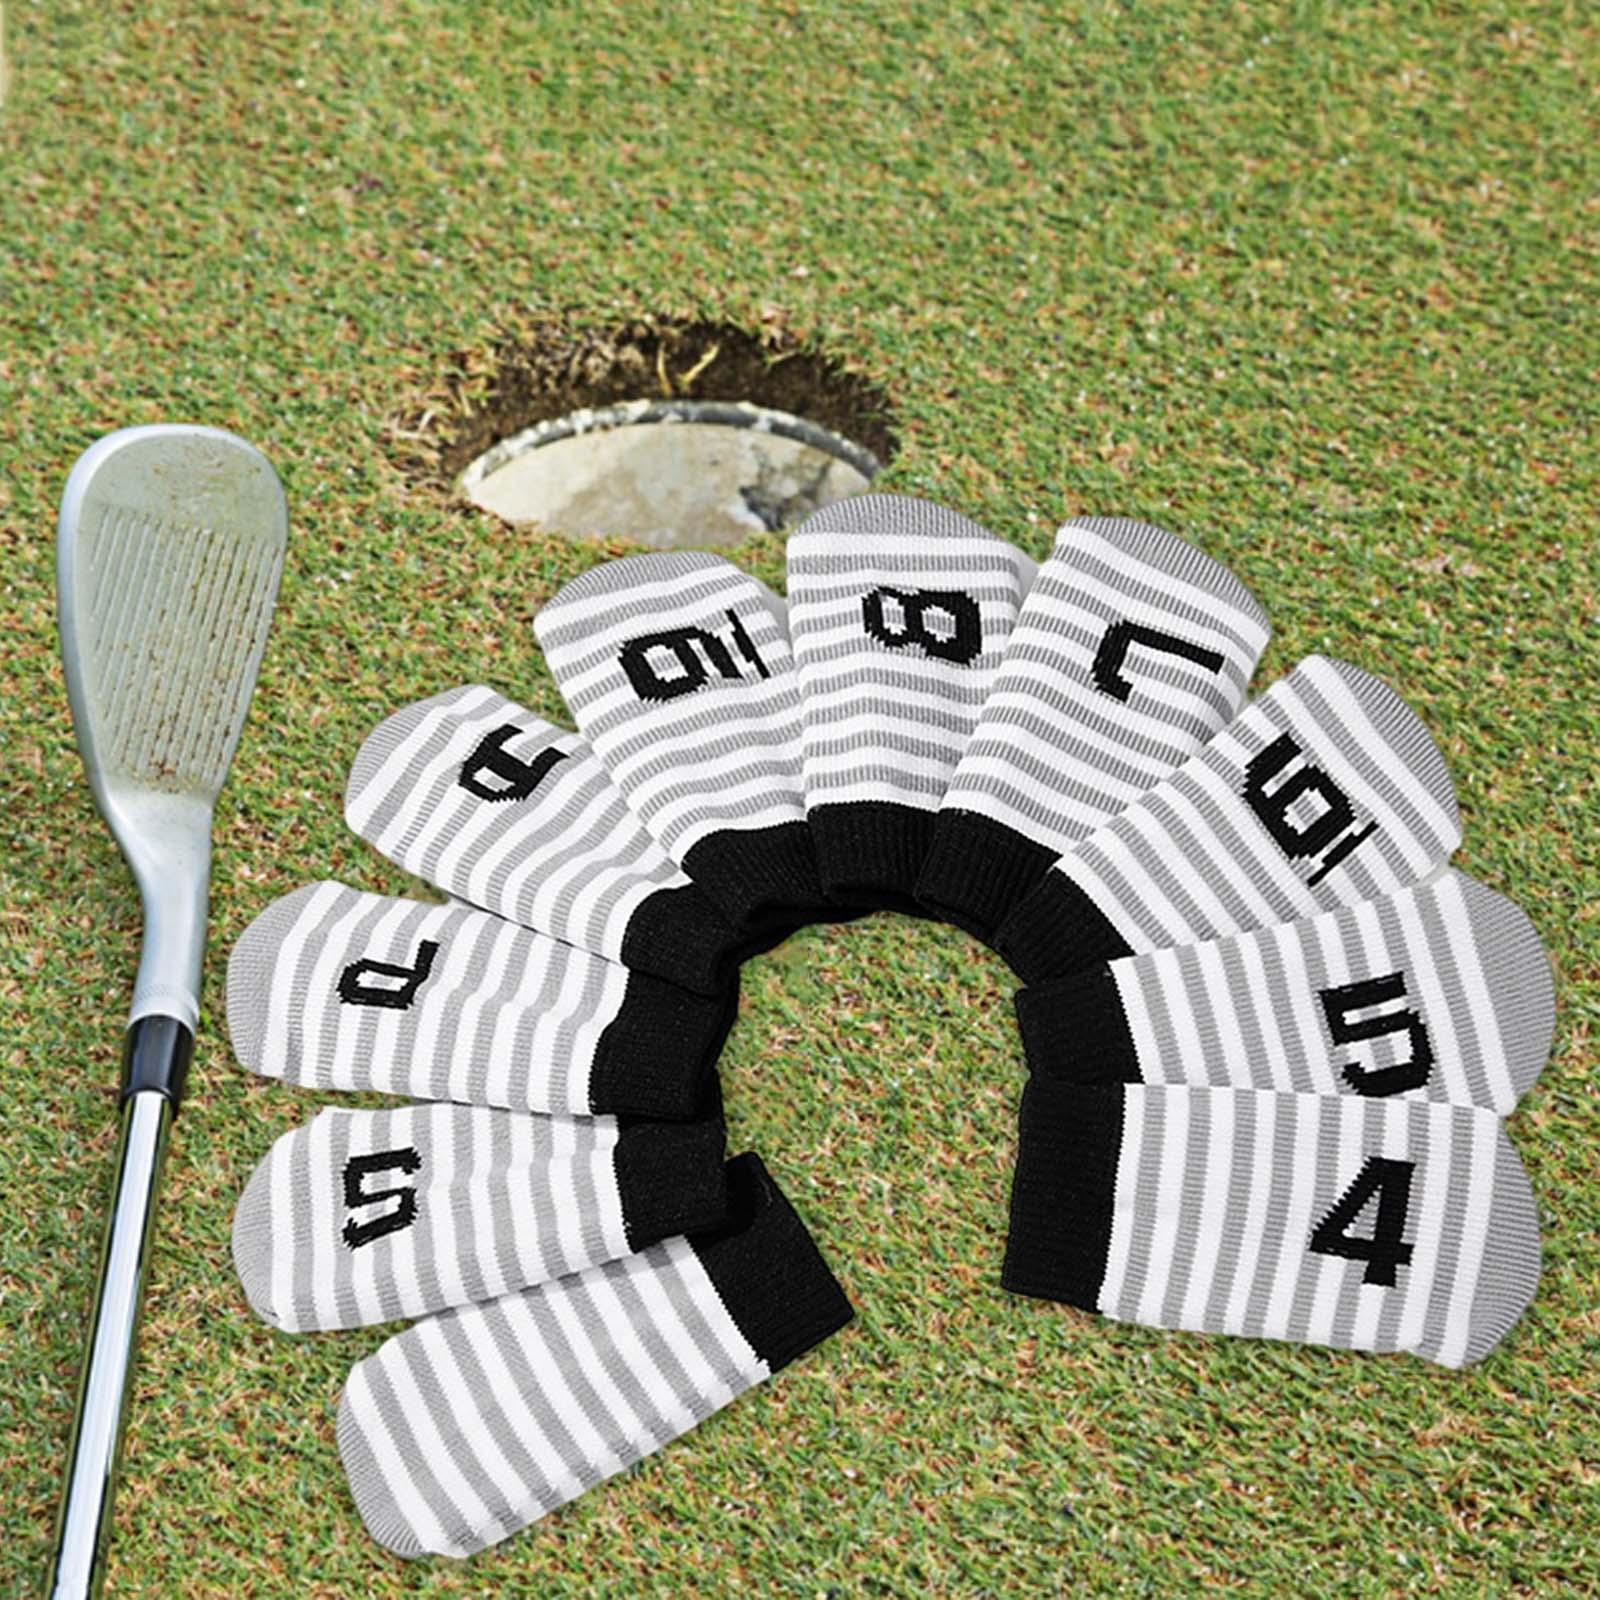 10Pcs Golf Iron Head Covers Knitted Durable Golf Wedges Covers for Men Women White Gray